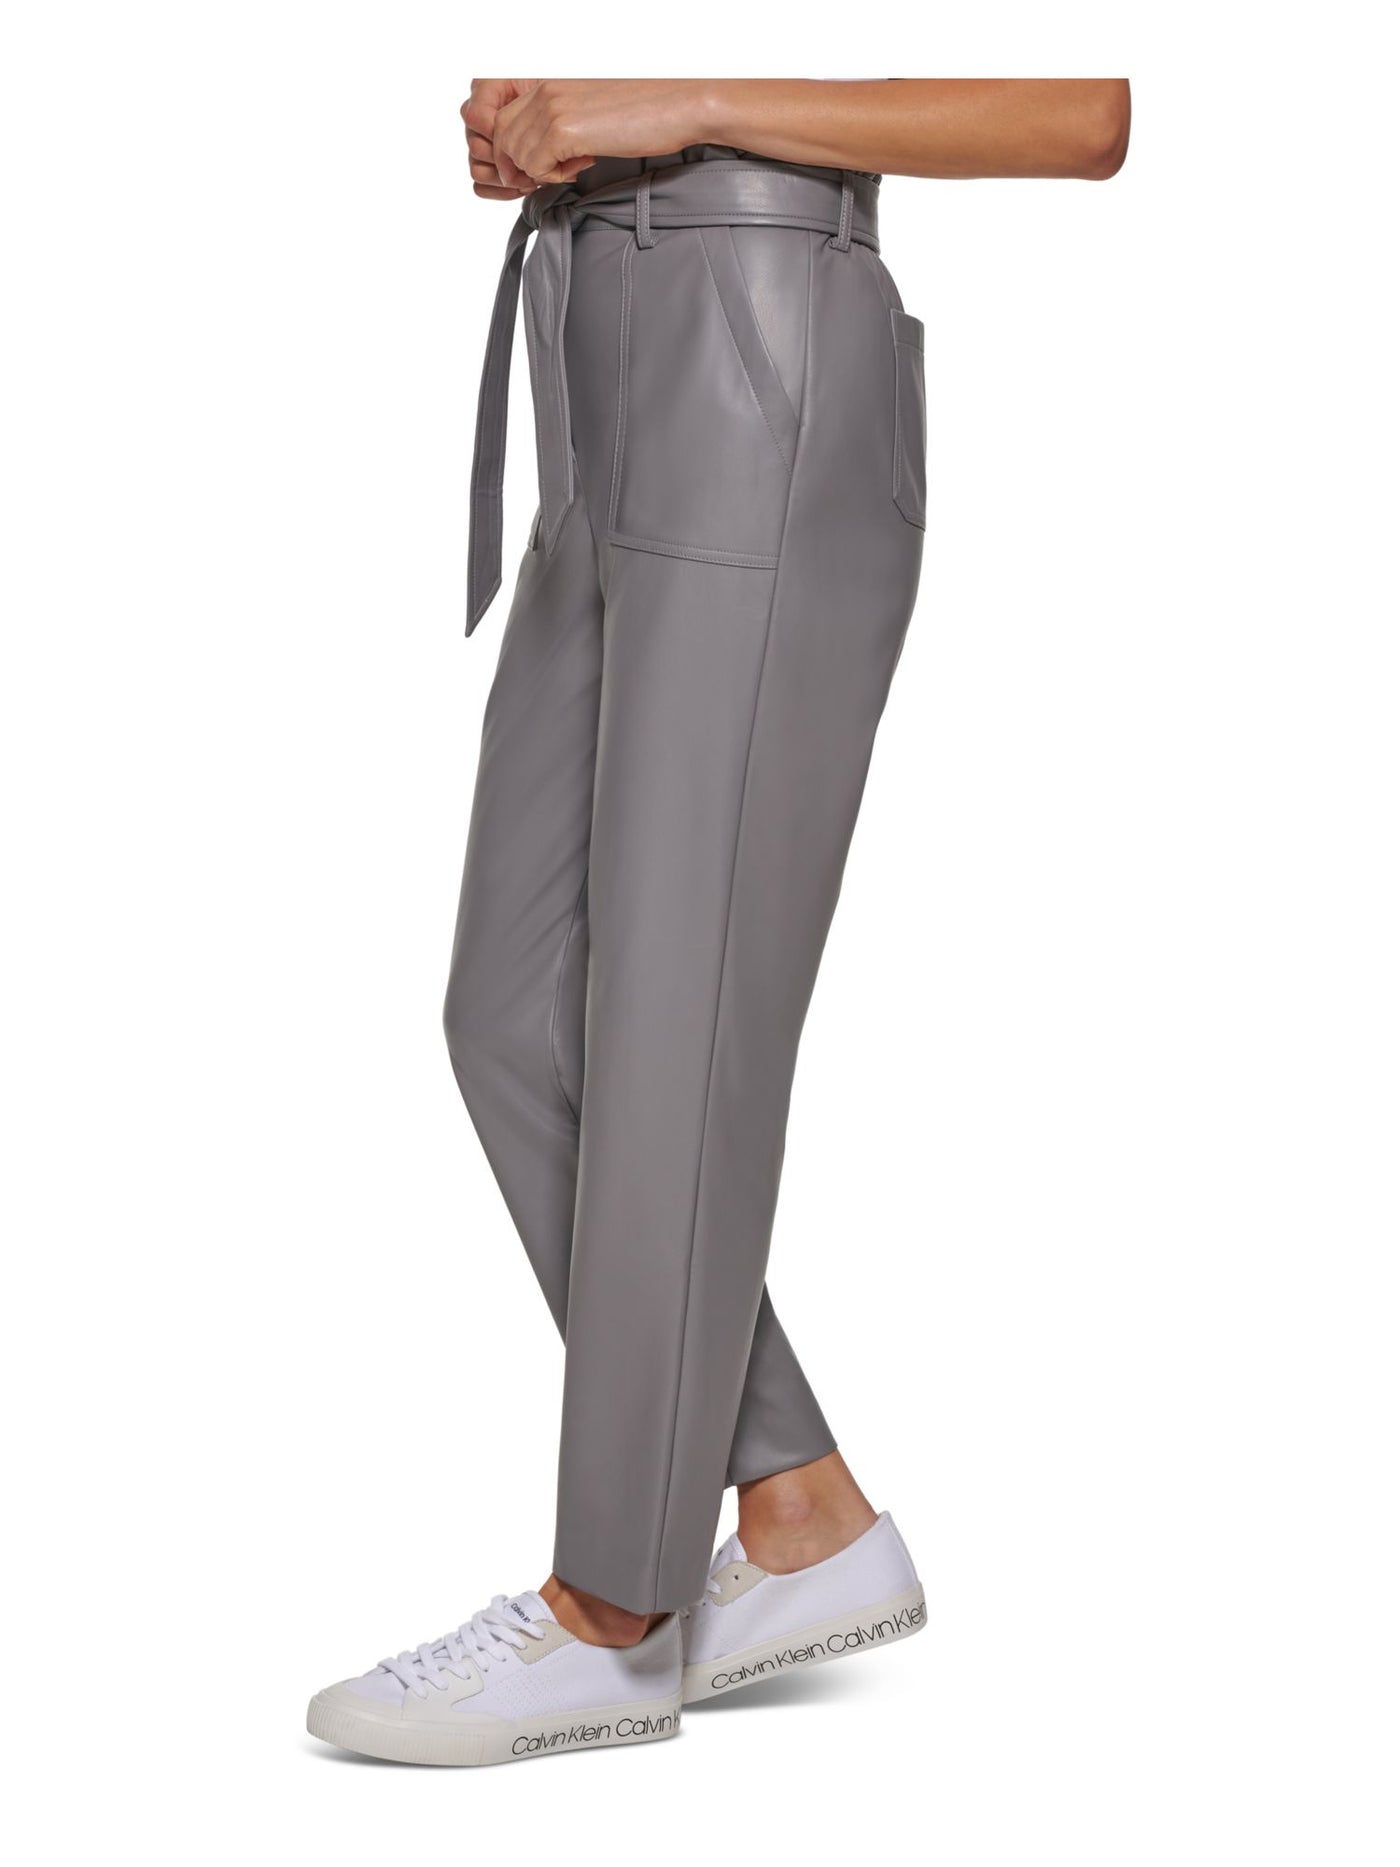 CALVIN KLEIN Womens Gray Faux Leather Zippered Pocketed Betled Pants XL